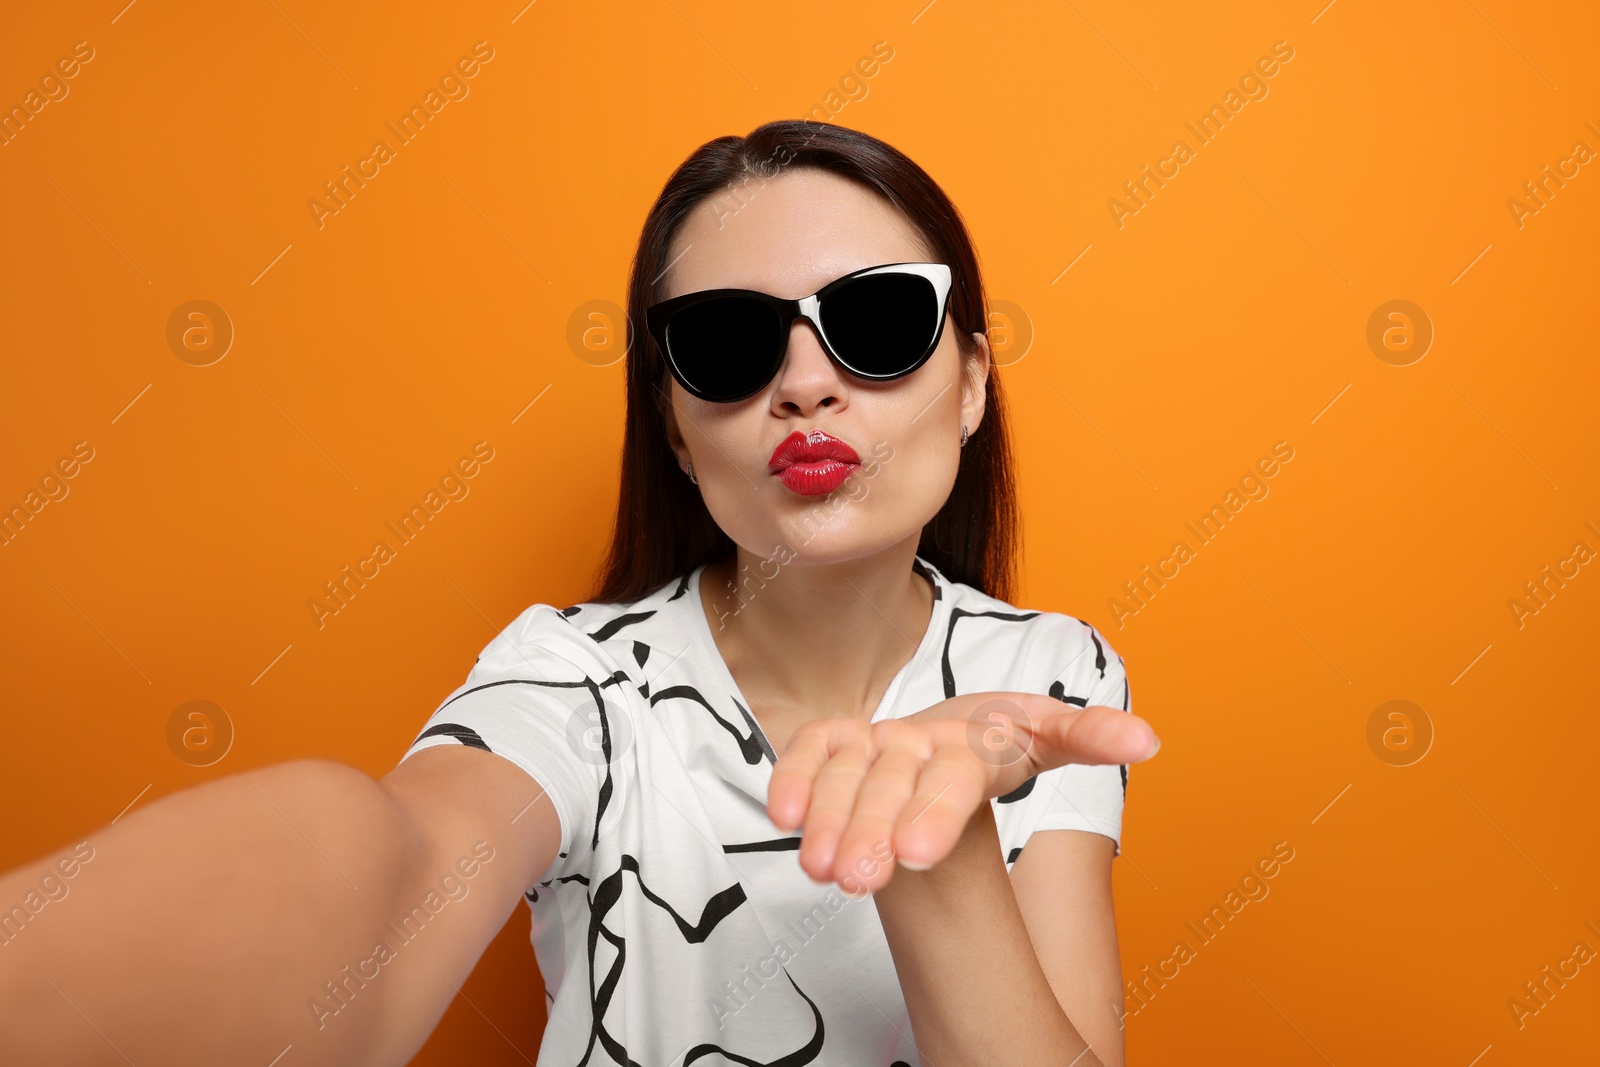 Photo of Beautiful young woman taking selfie while blowing kiss on orange background